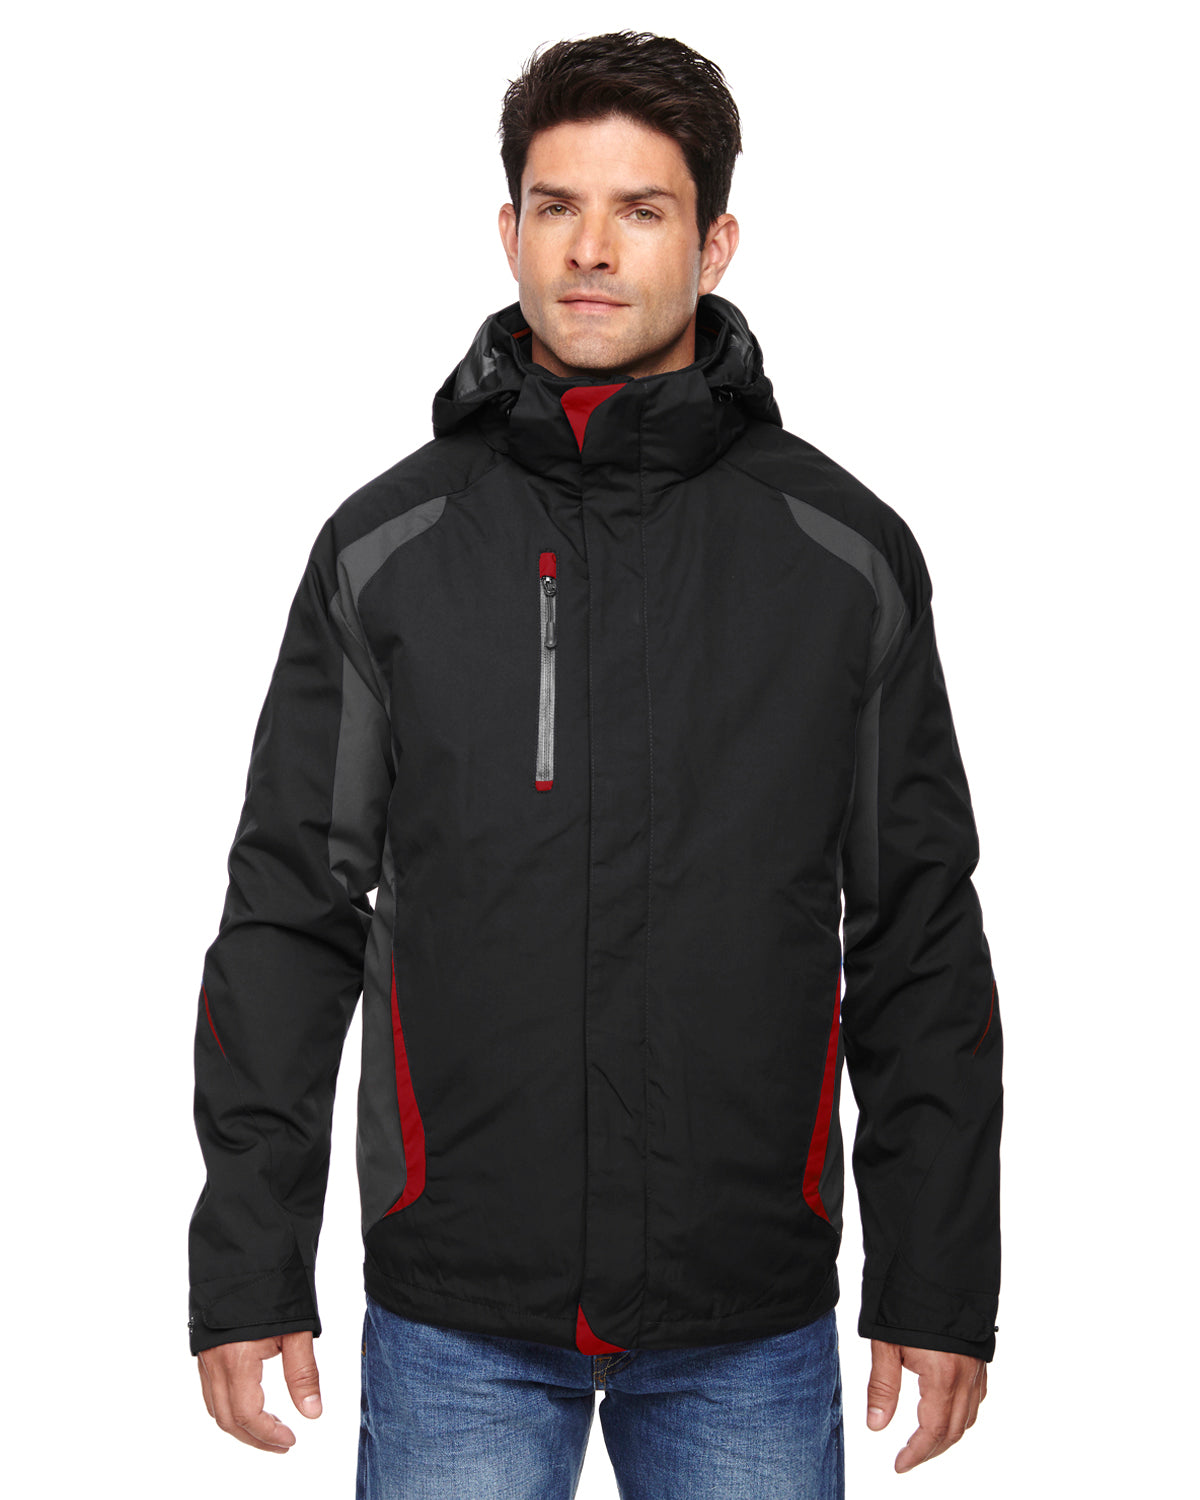 NORTH END MEN'S 3-IN-1 JACKET WITH INSULATED LINER